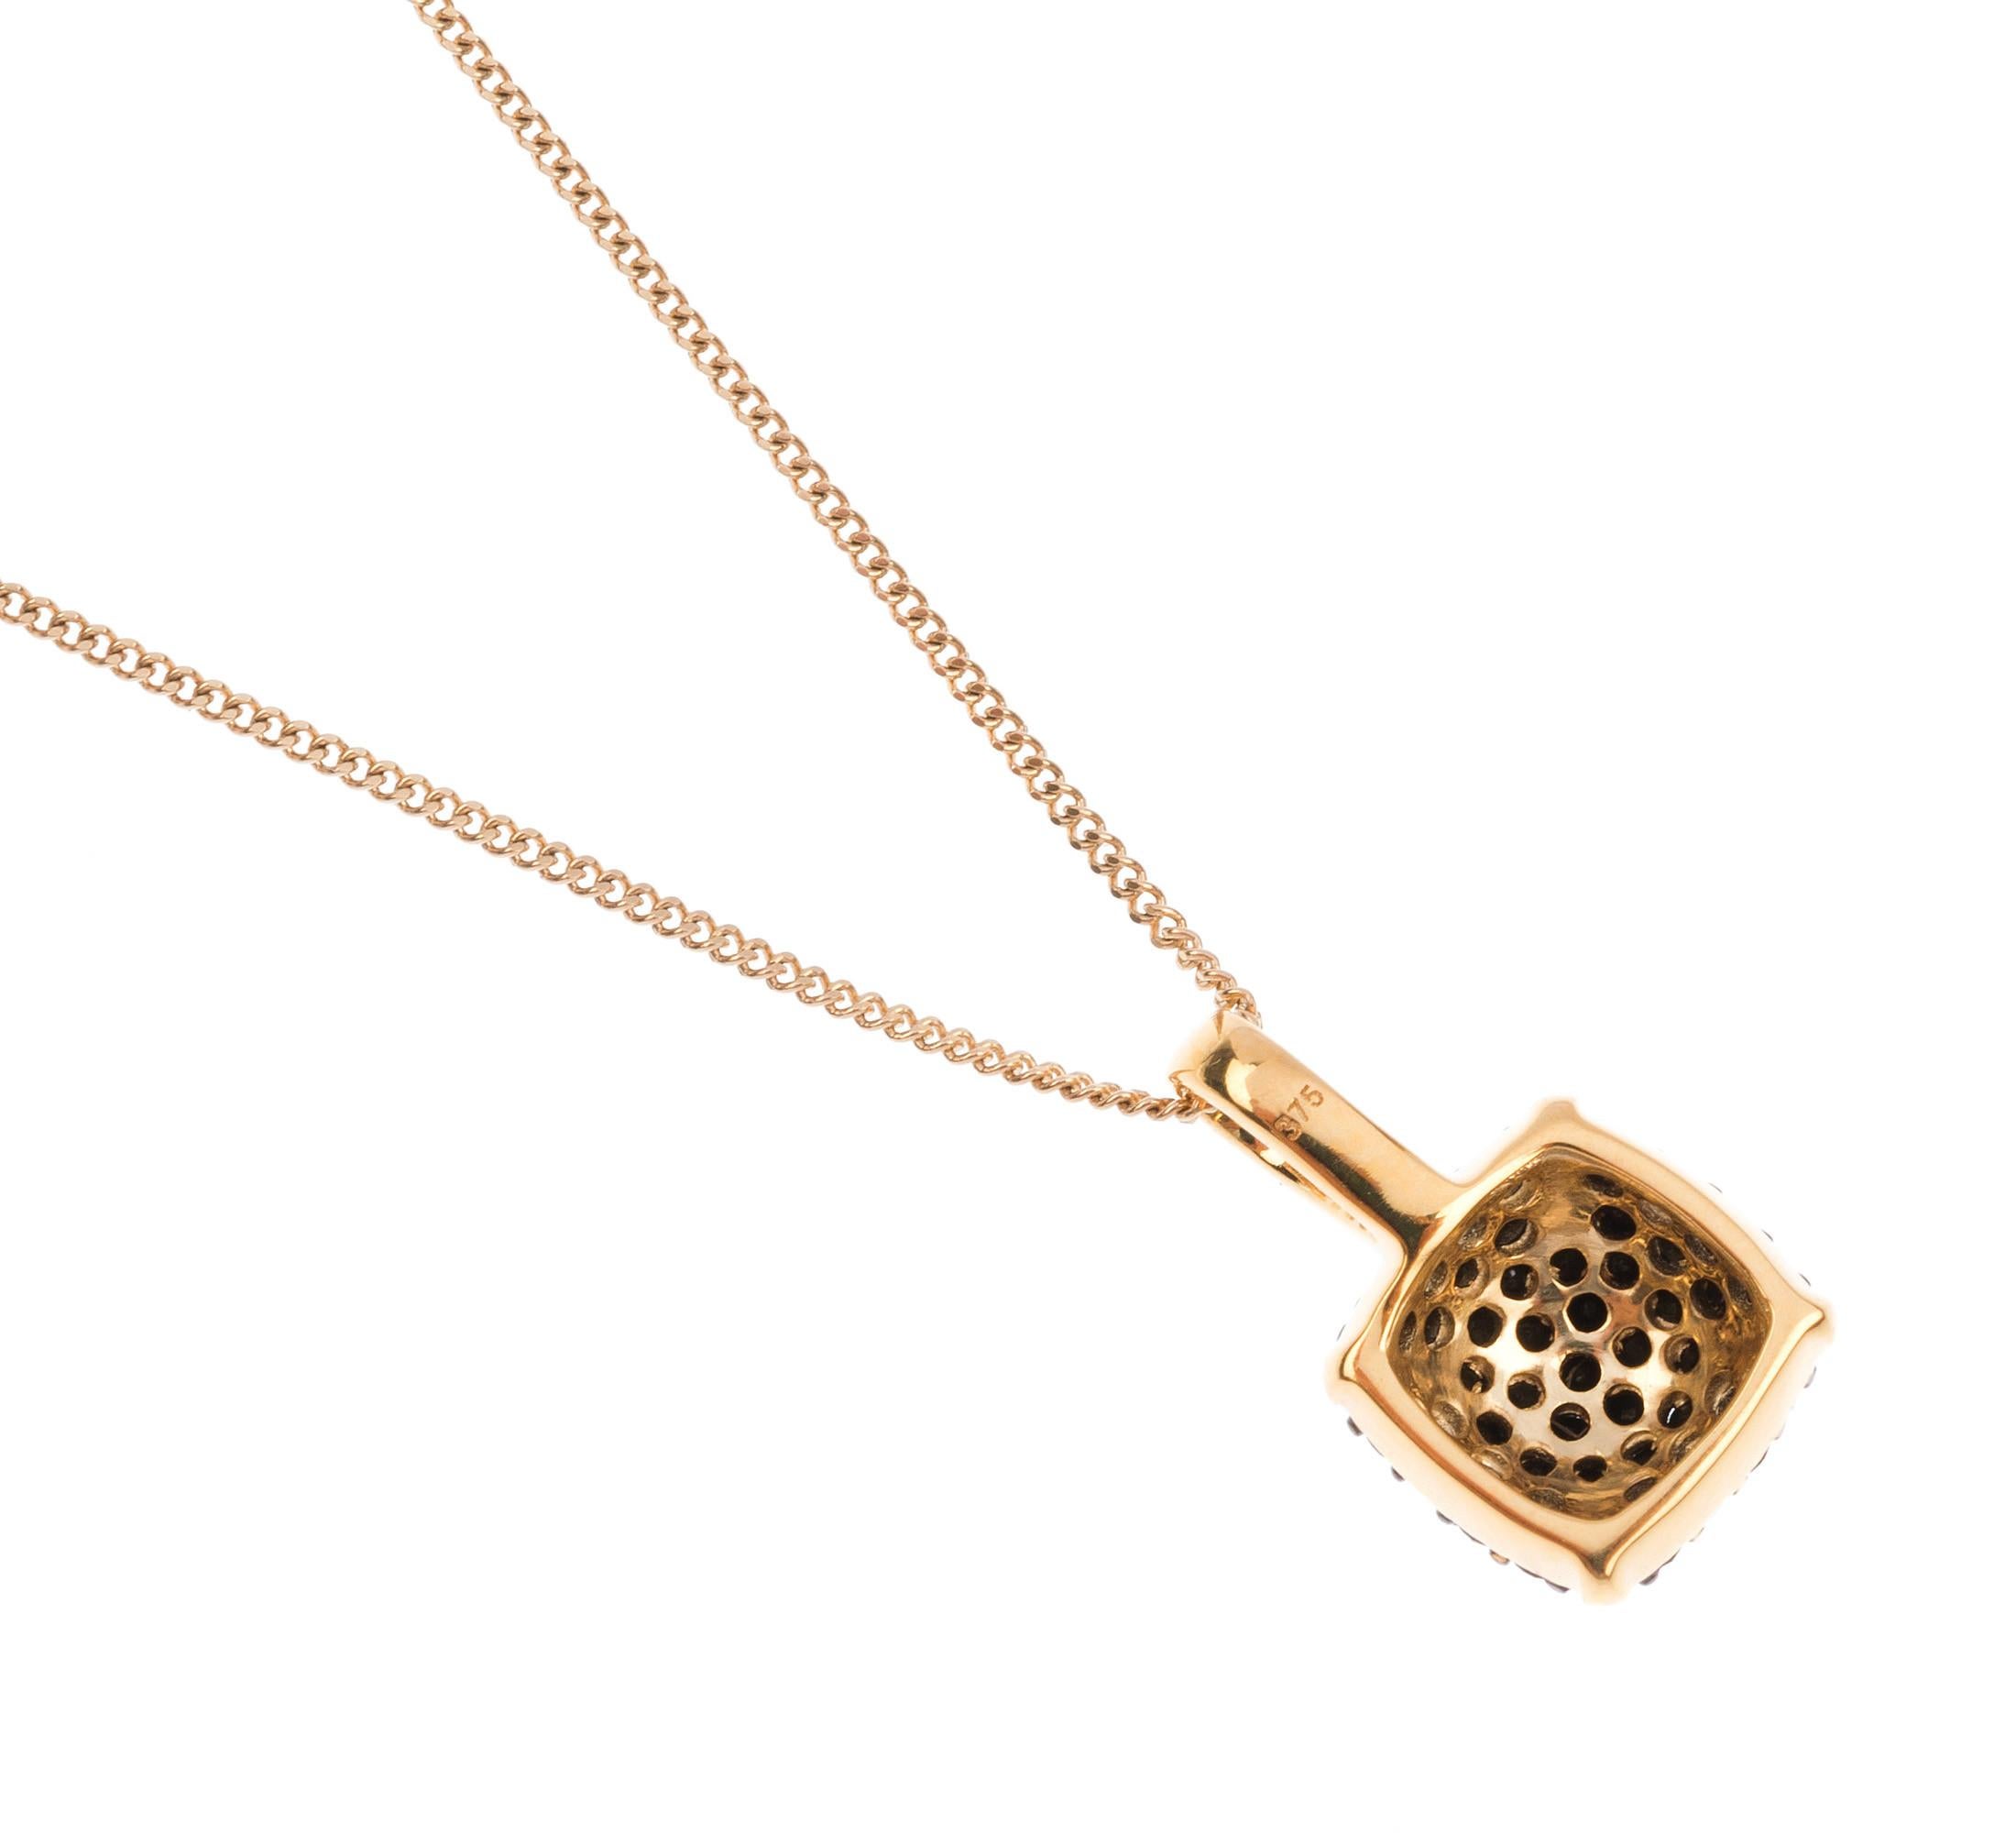 A fabulous limited edition Pendant, each designed as a cluster of black spinels, sittings beautifully within the yellow gold setting.

The trendy combination of black and gold creates, an elegant and fashion-forward finish... that is simply perfect